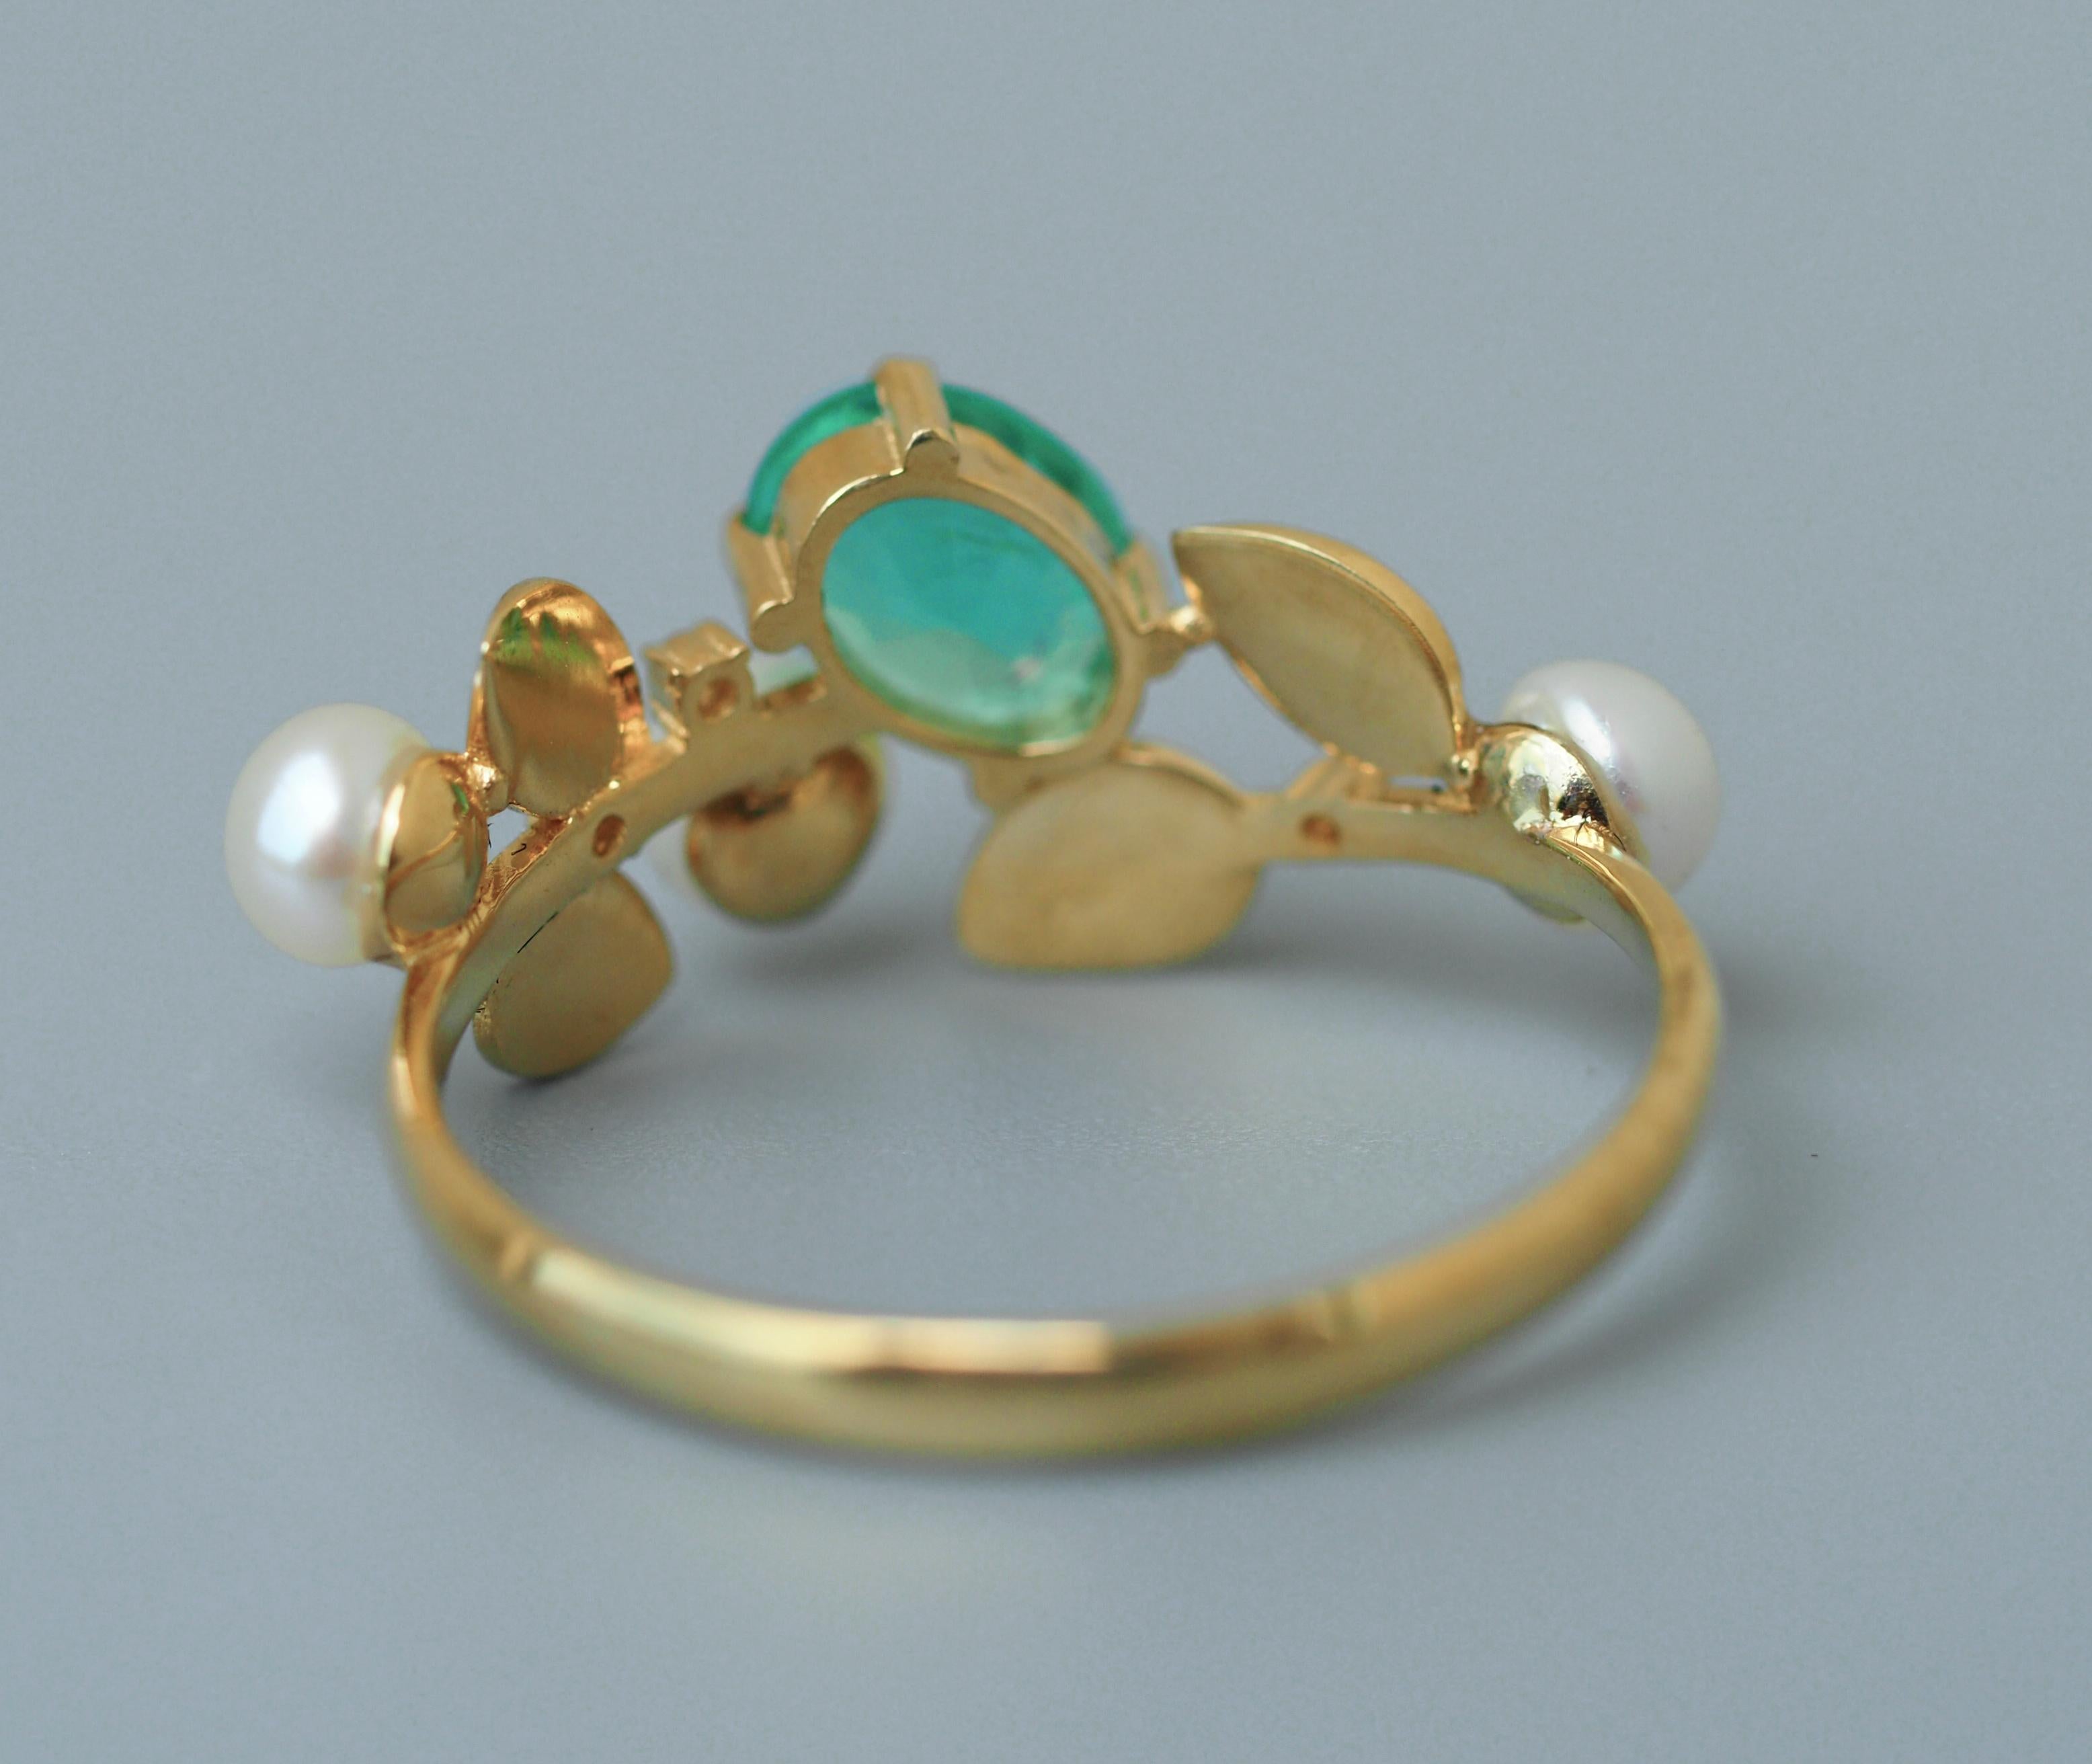 For Sale:  14k Gold Floral Ring with Oval Apatite, Diamonds and Pearls 6